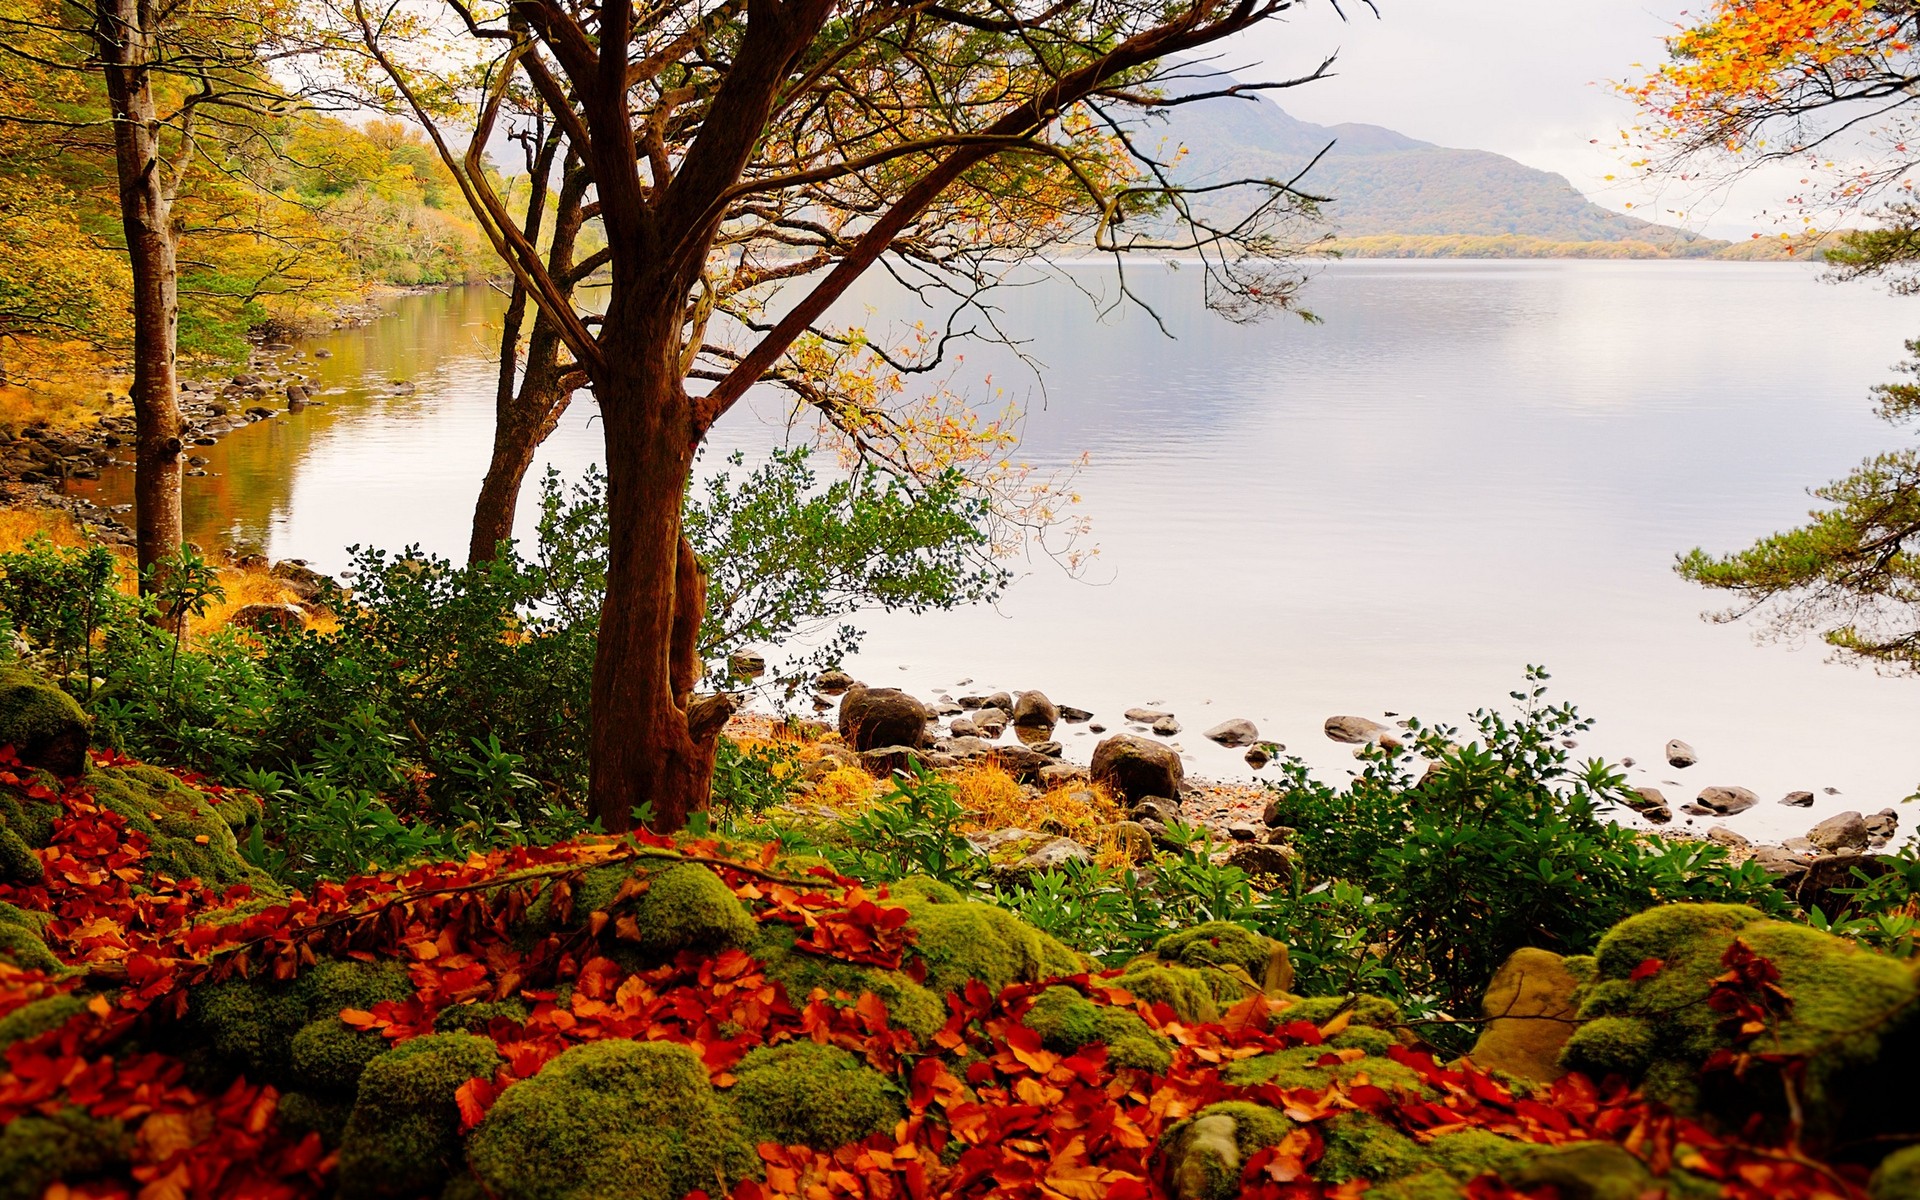 General 1920x1200 nature fall fallen leaves red leaves lake landscape rocks colorful leaves